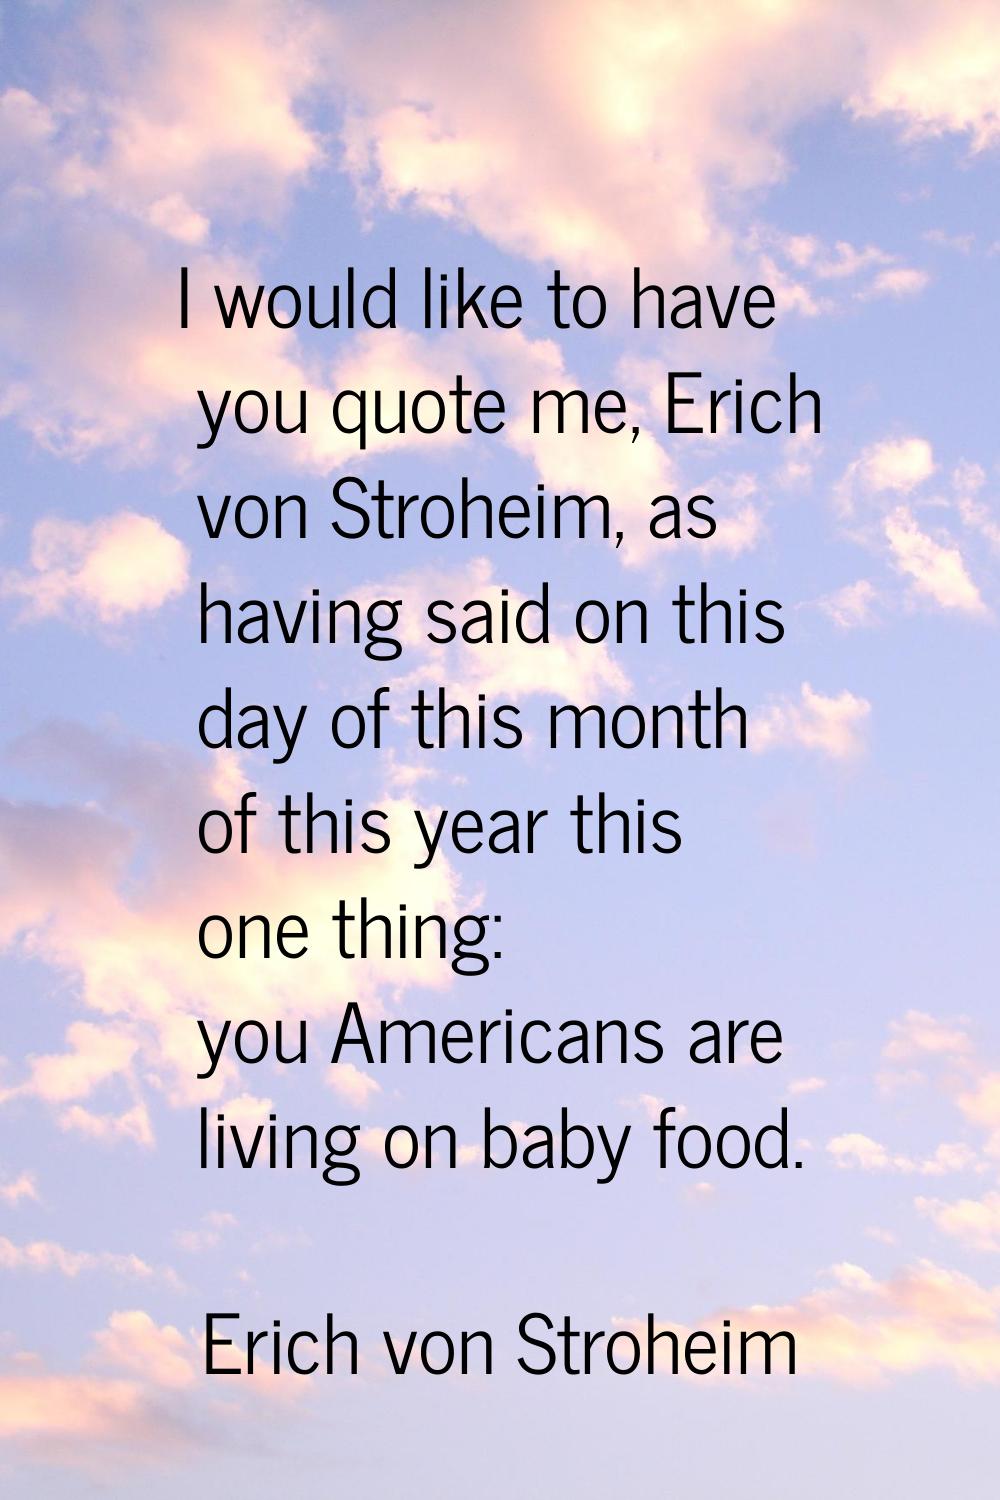 I would like to have you quote me, Erich von Stroheim, as having said on this day of this month of 